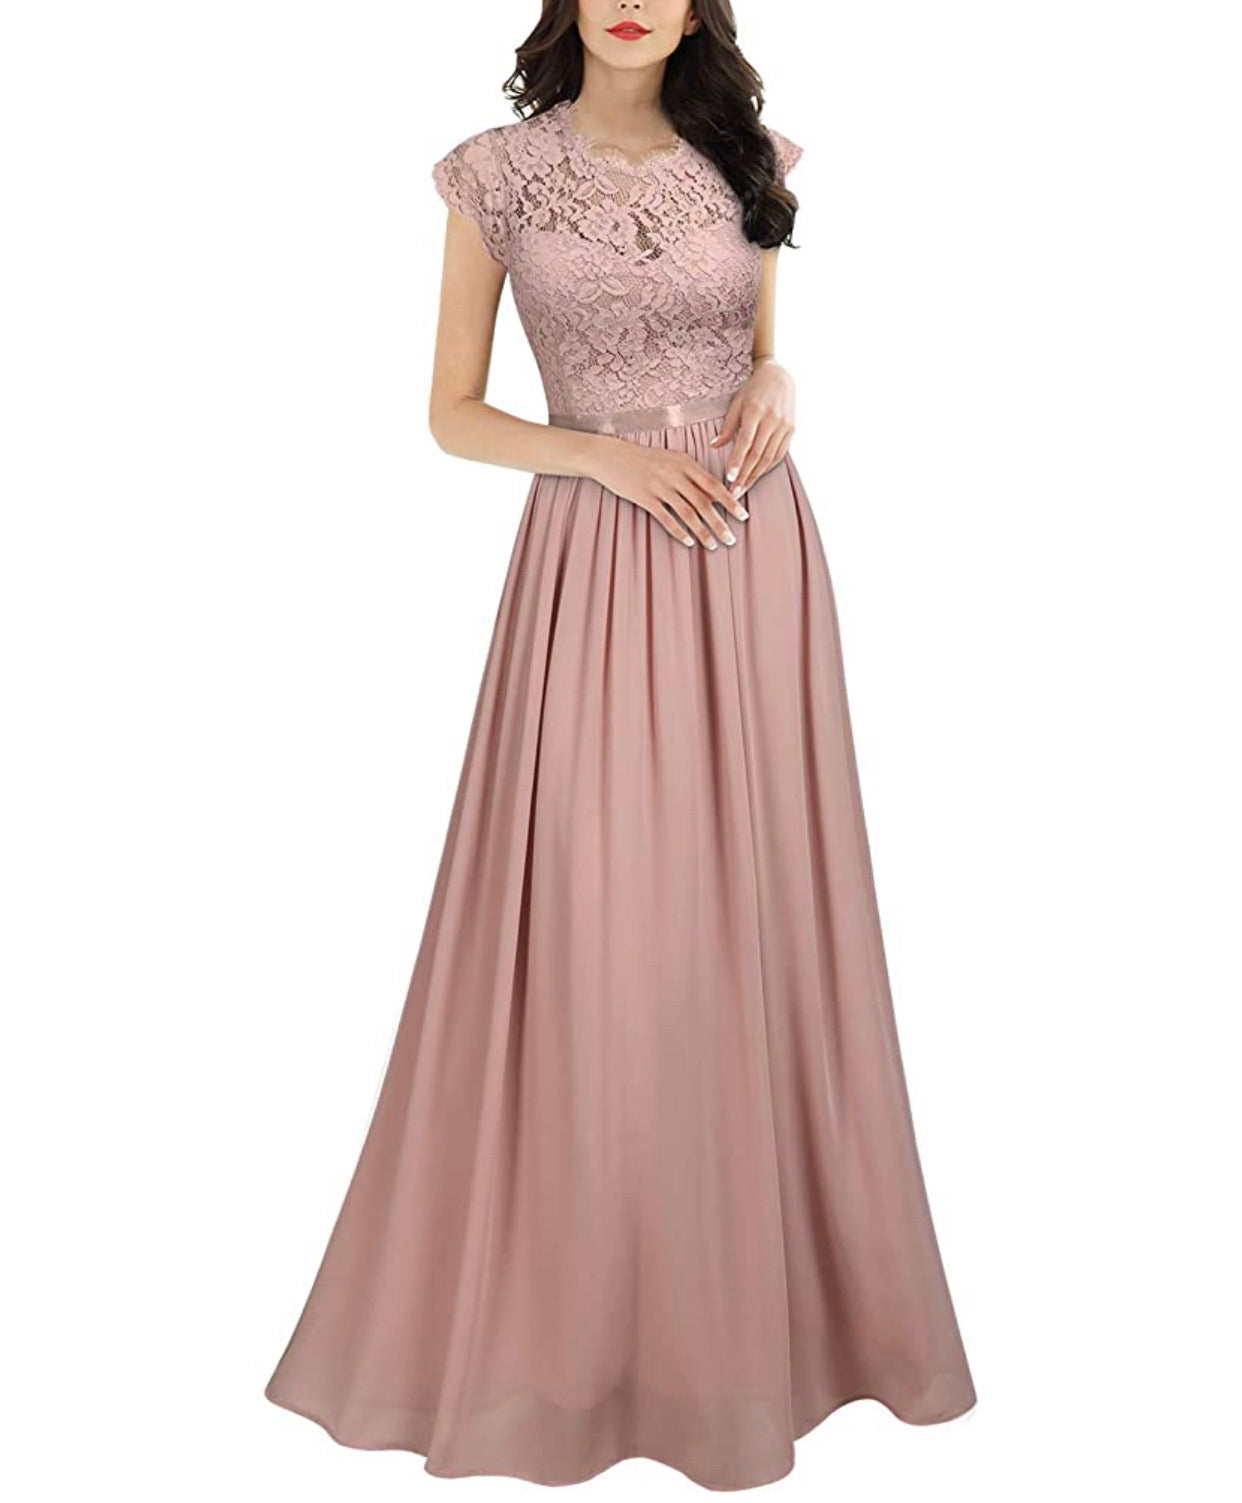 Formal Floral Lace Long Length Dress, Sizes Small - 2XLarge (Pink Dress)